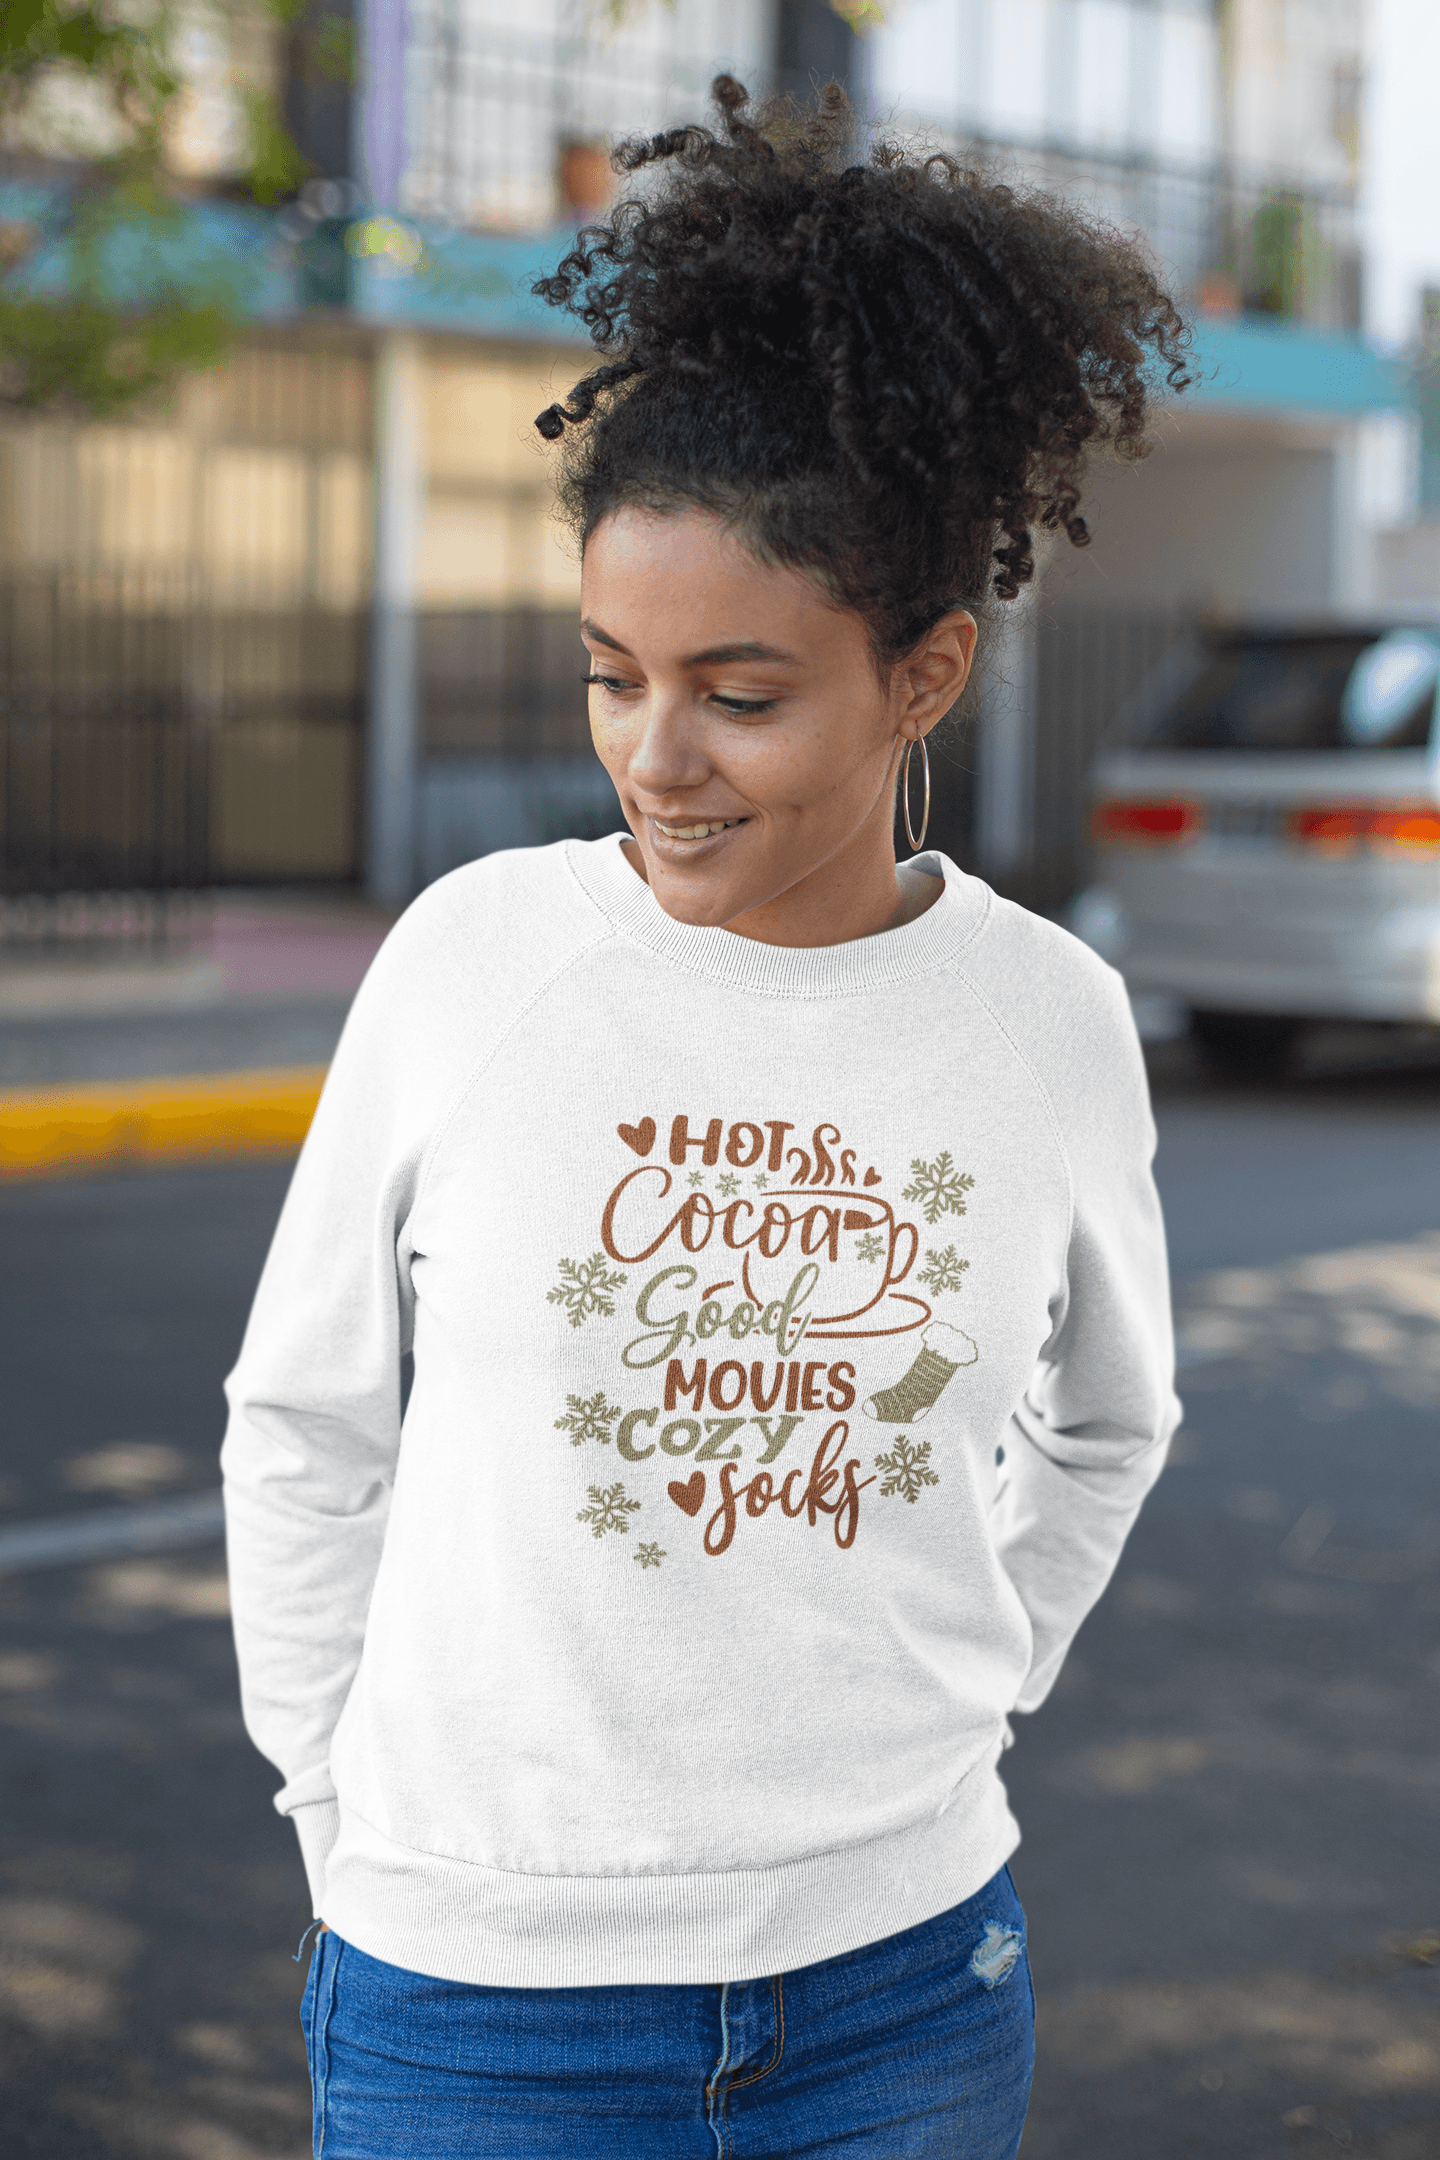 Hot Cocoa, Good Movies, Cozy Socks Sweatshirt - Sharp Tact Kreativ | Tees & Gifts with Encouraging Messages to Brighten Your Day with a Bit of Wit